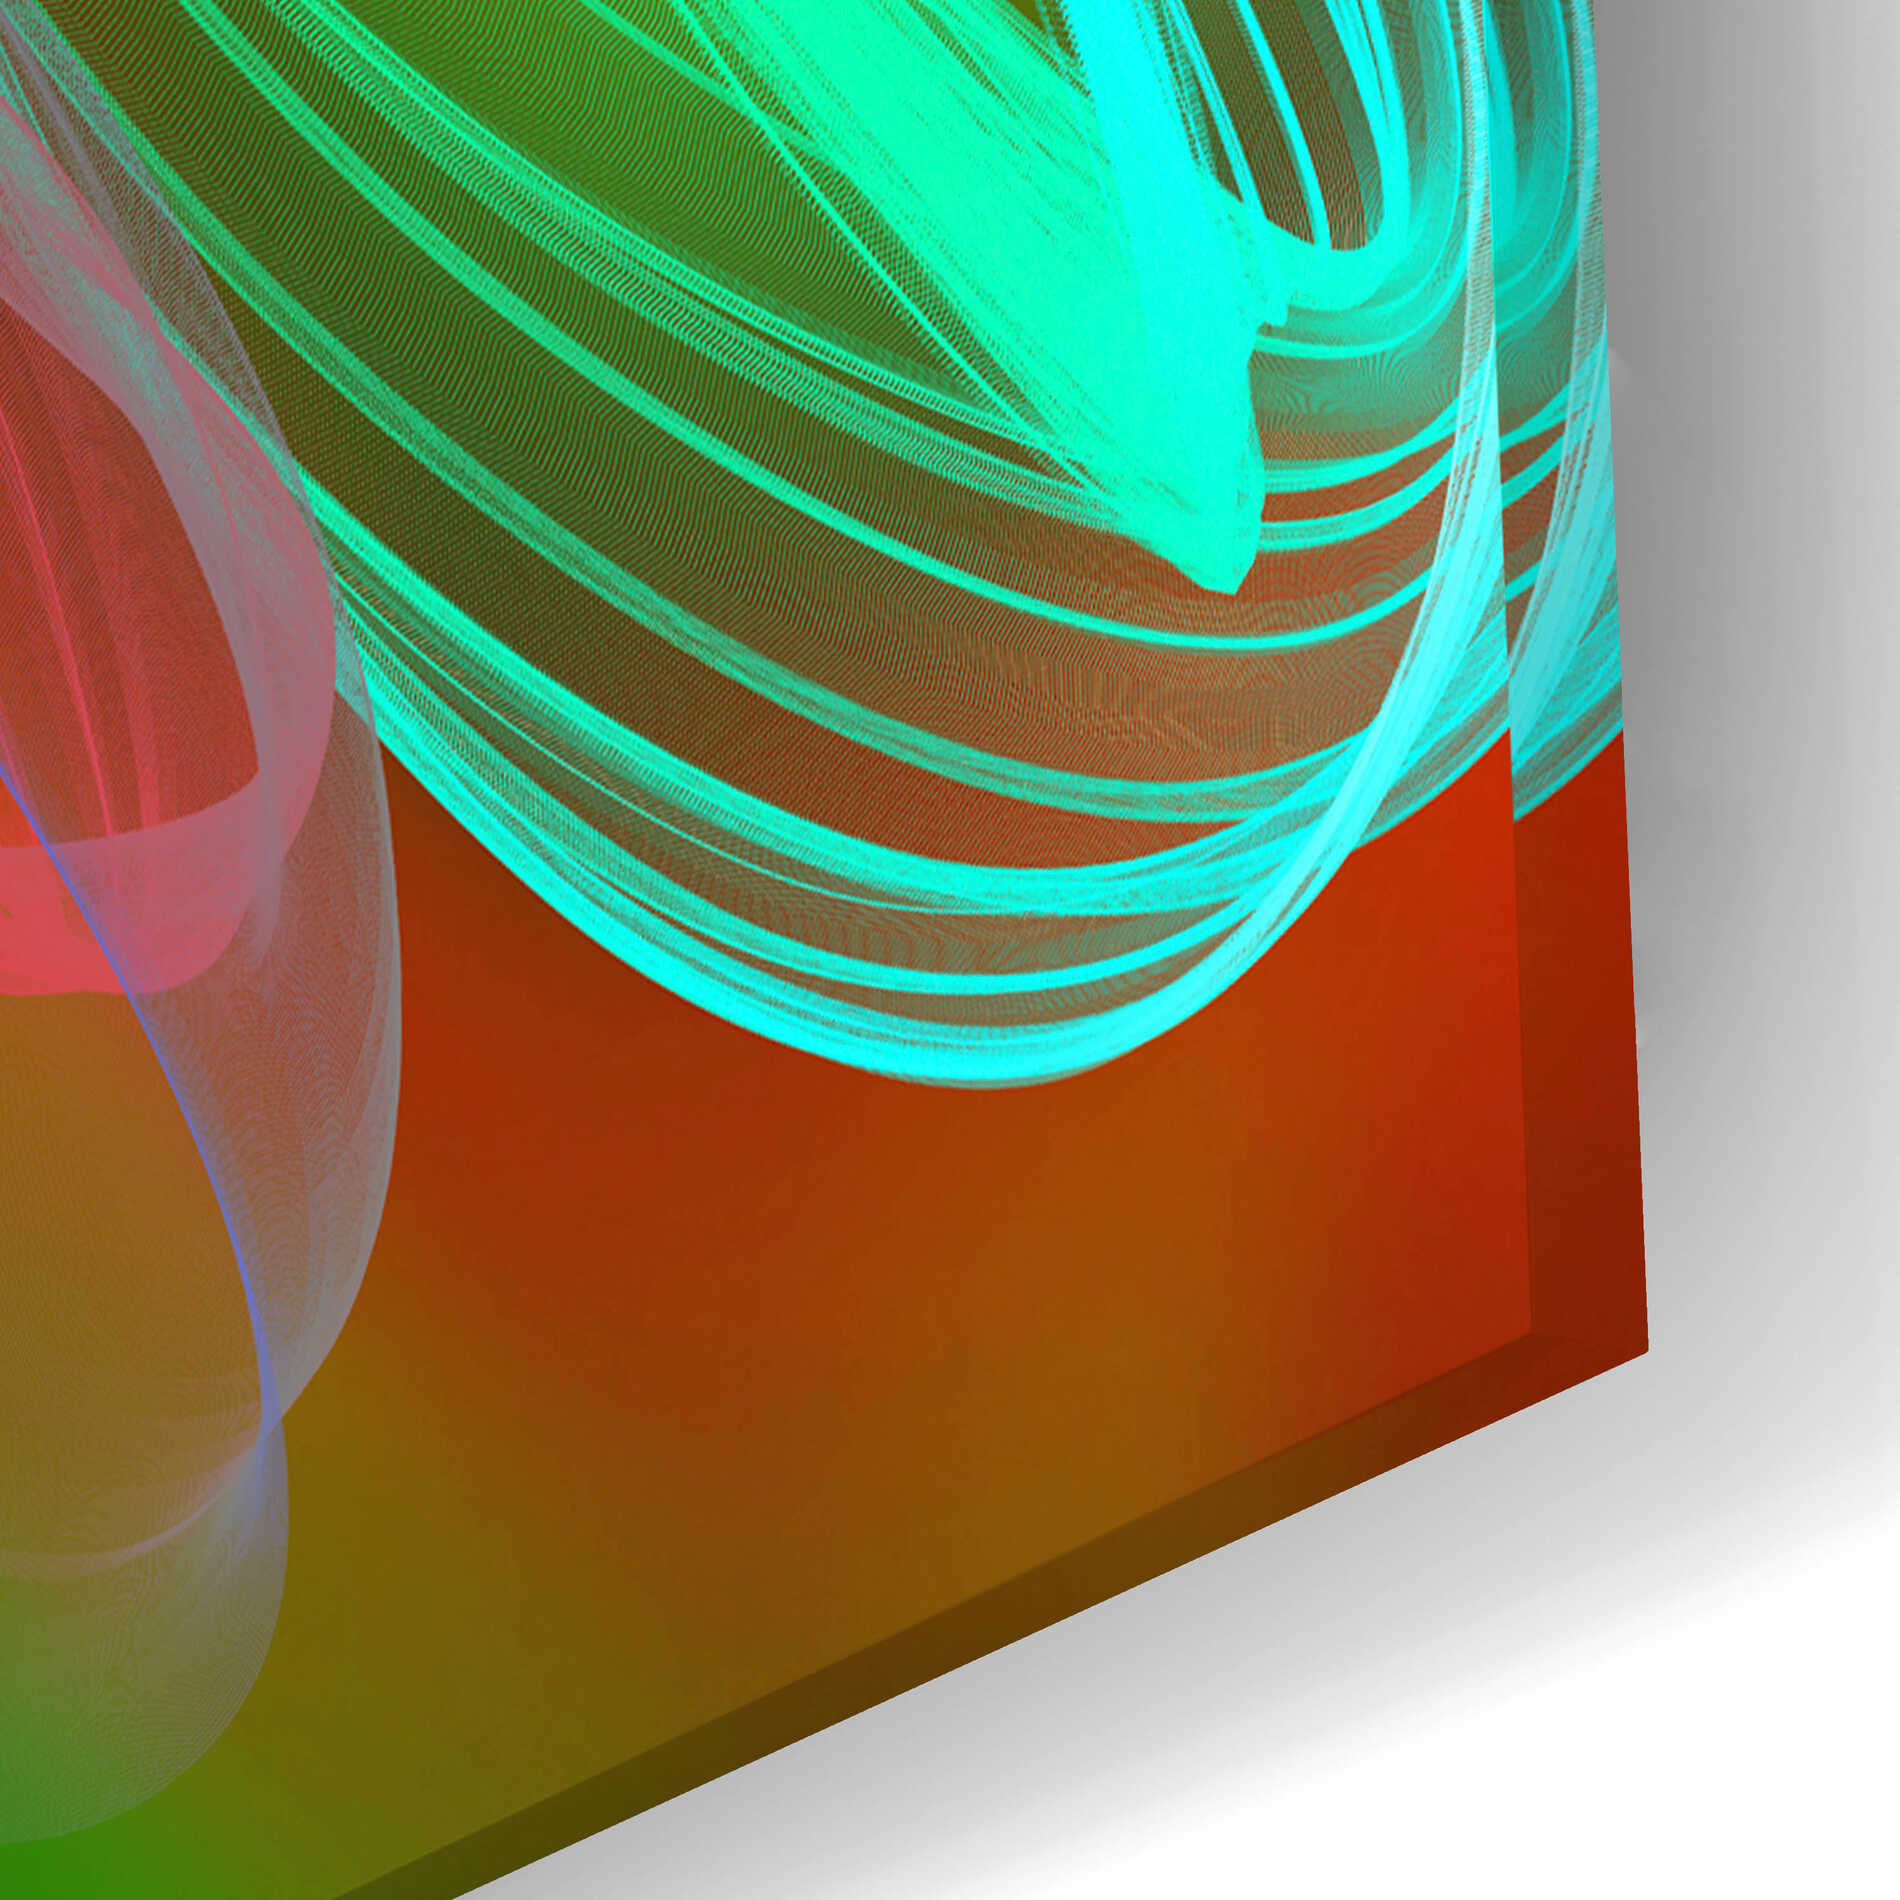 Epic Art 'Inverted Color In The Lines 7' by Irena Orlov Acrylic Glass Wall Art,24x16